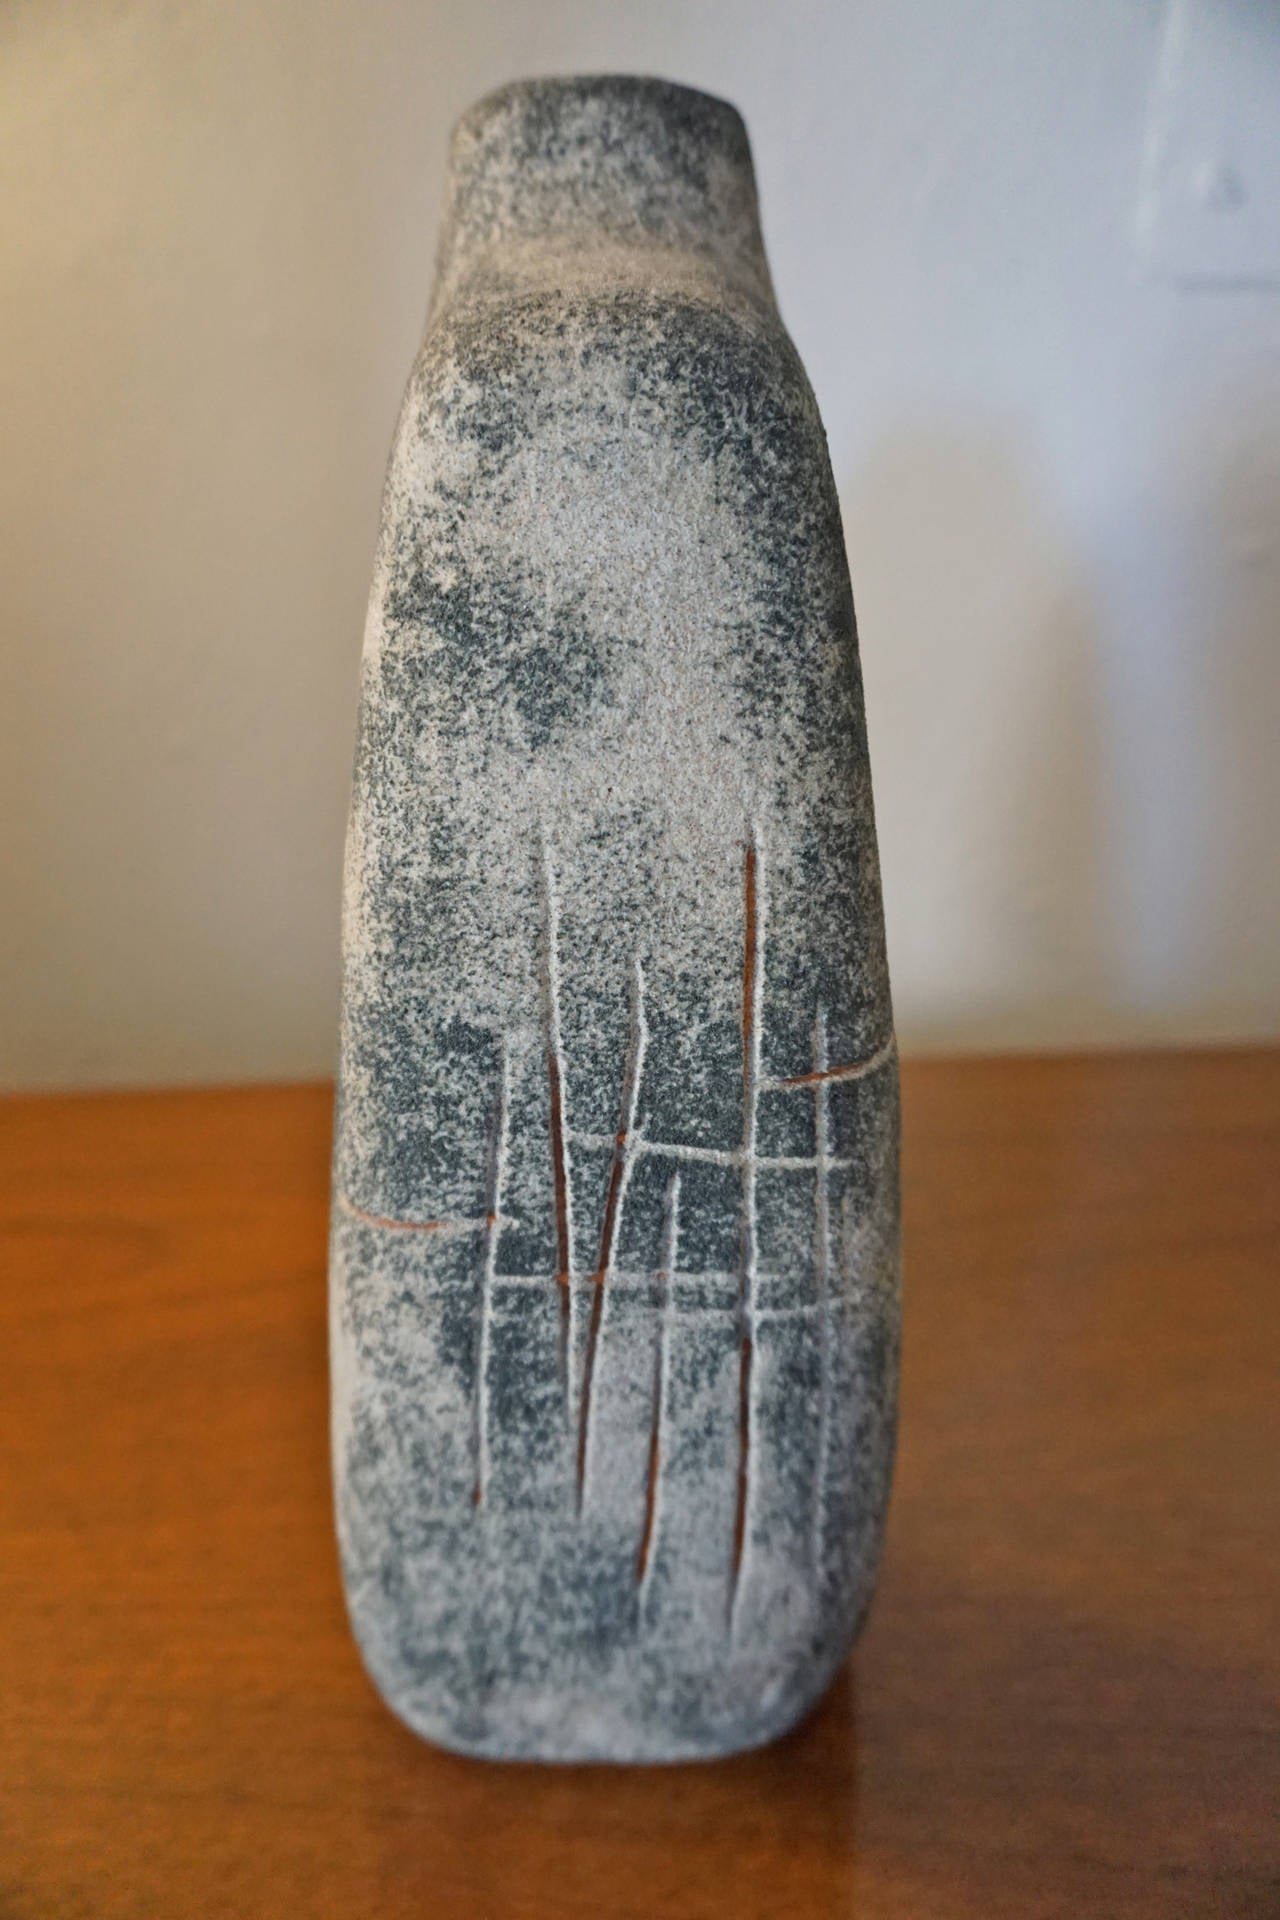 Hungarian Mottled Ceramic Vessel with Sgraffito